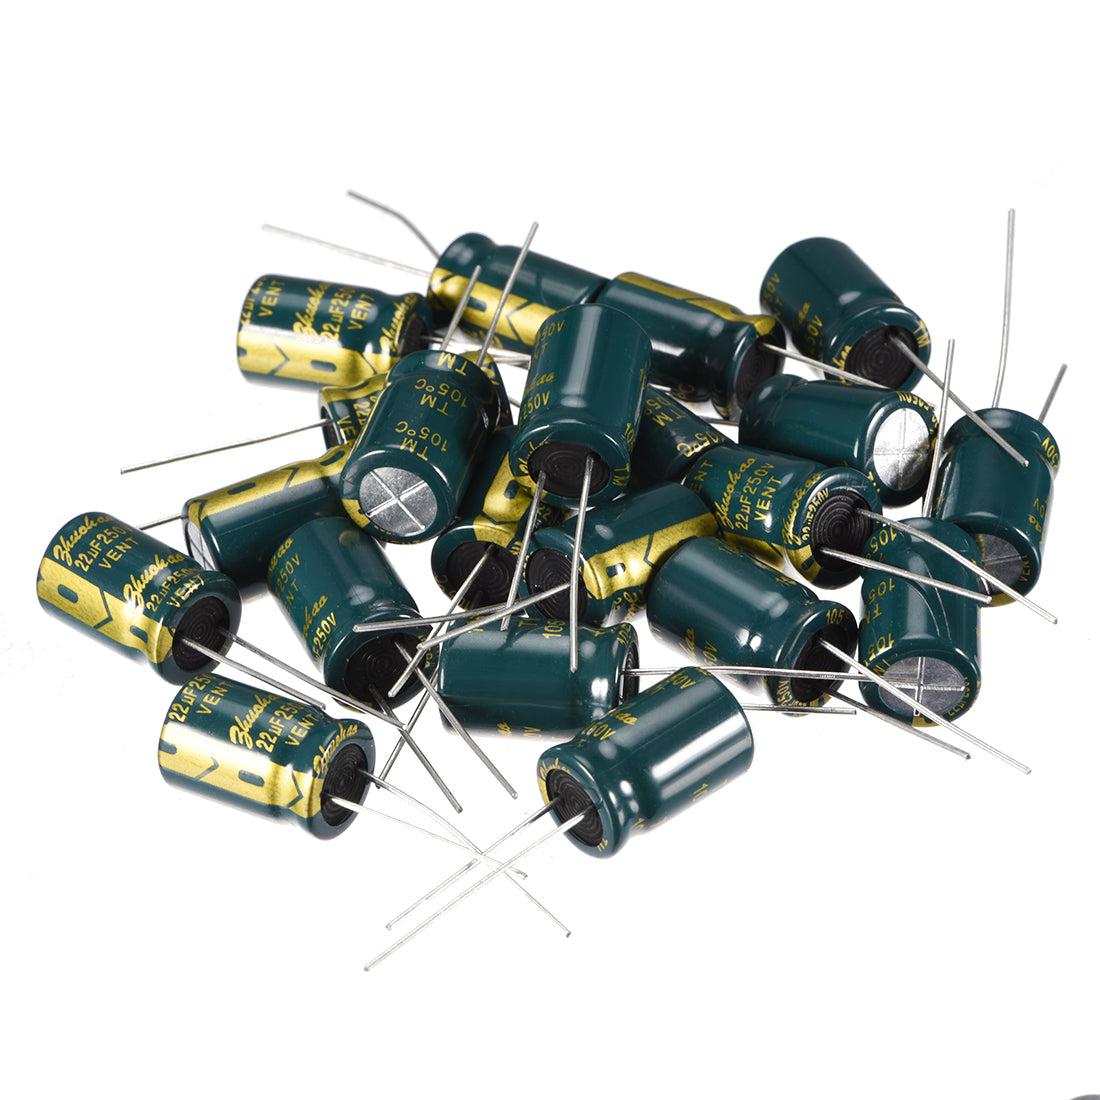 uxcell Uxcell Aluminum Radial Electrolytic Capacitor Low ESR Green with 22uF 250V 105 Celsius Life 3000H 10 x 16 mm High Ripple Current,Low Impedance 20pcs